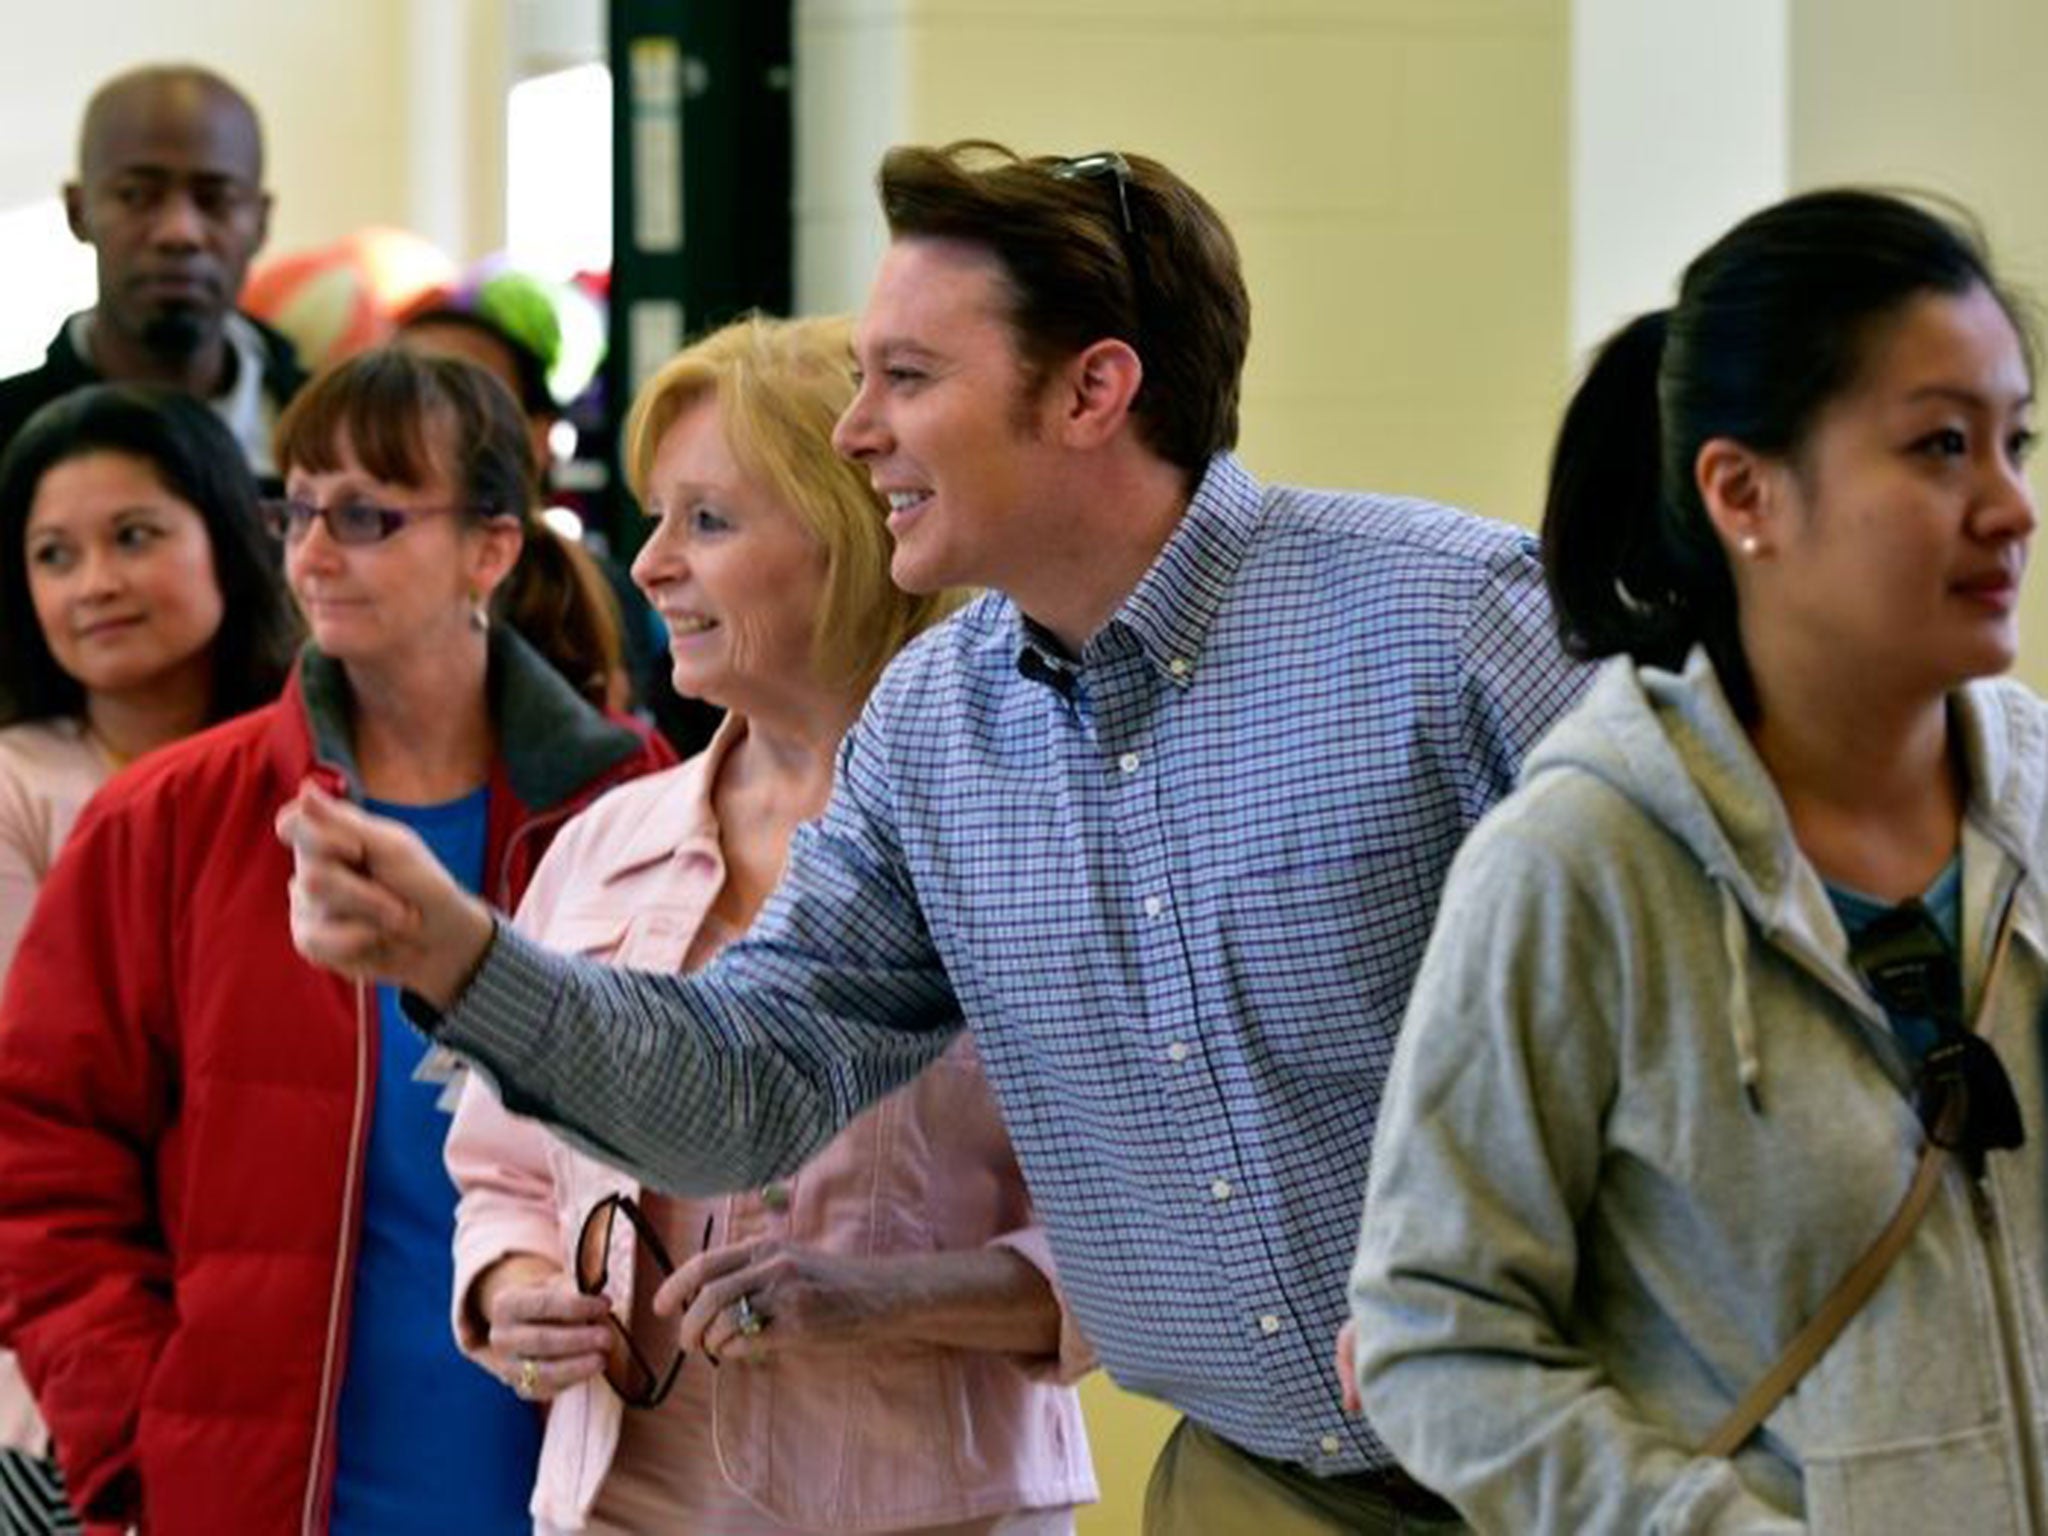 Clay Aiken, Democratic candidate for U.S. Congress in North Carolina's Second District, jokes with members of the media as he waits in line to vote